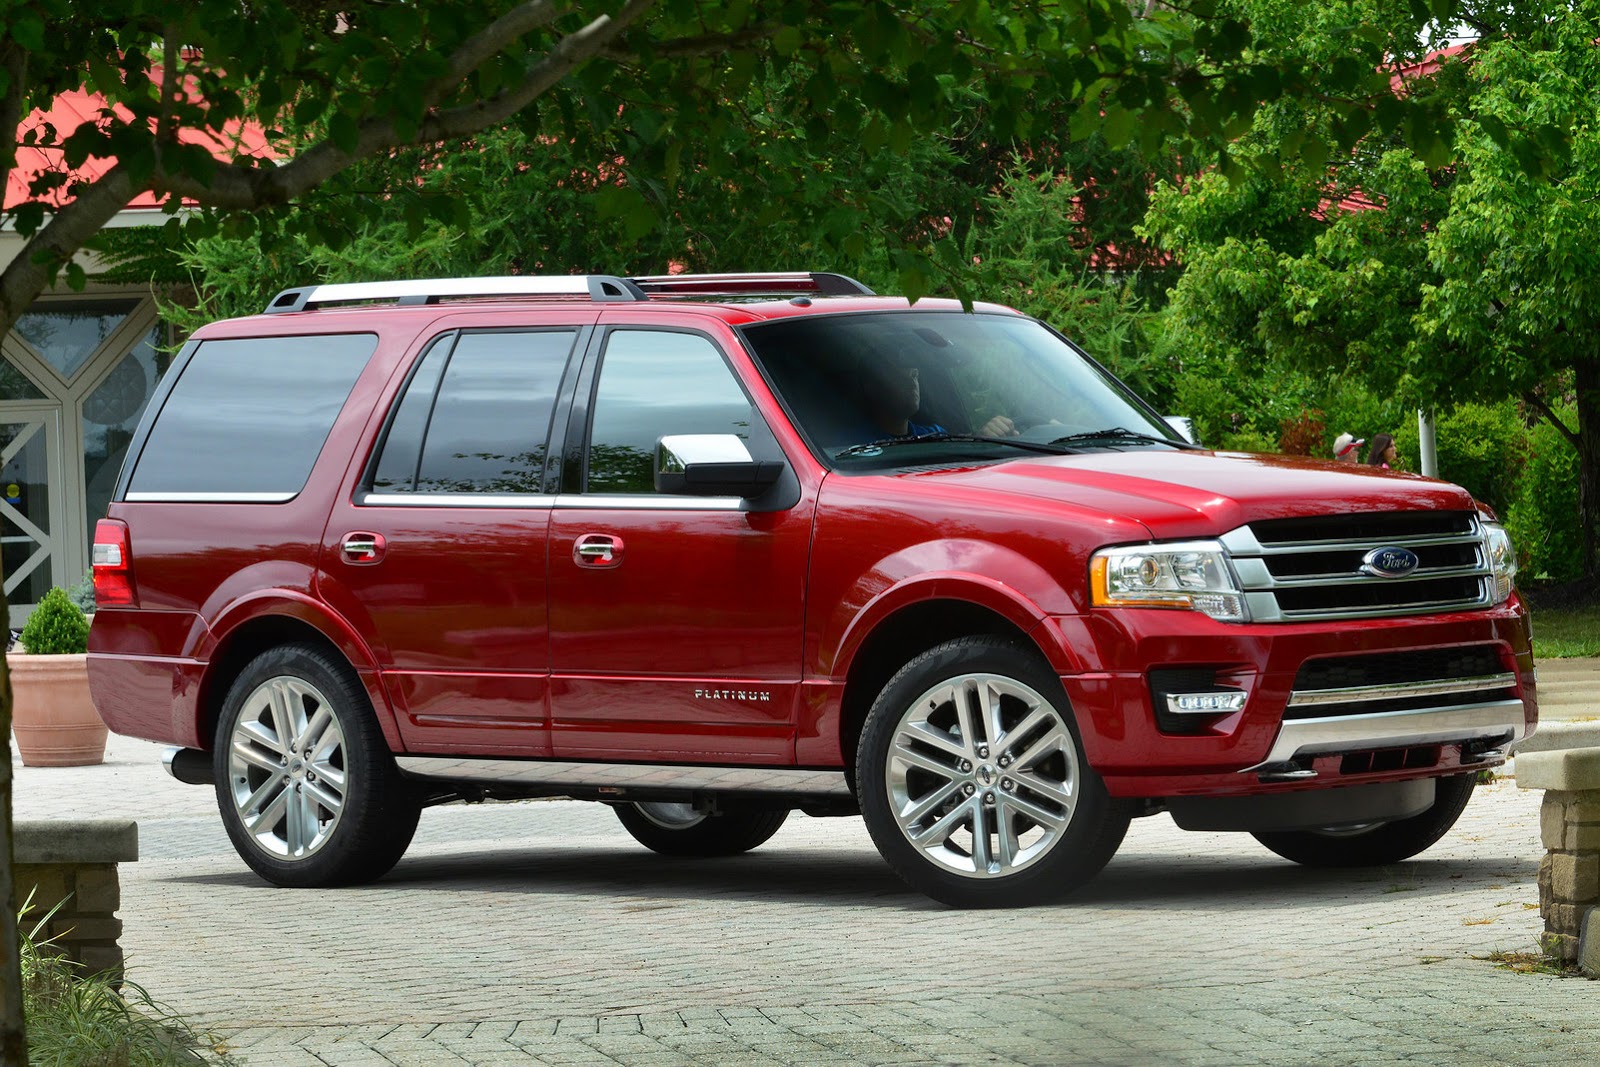 Full-Size SUV - Ford Expedition